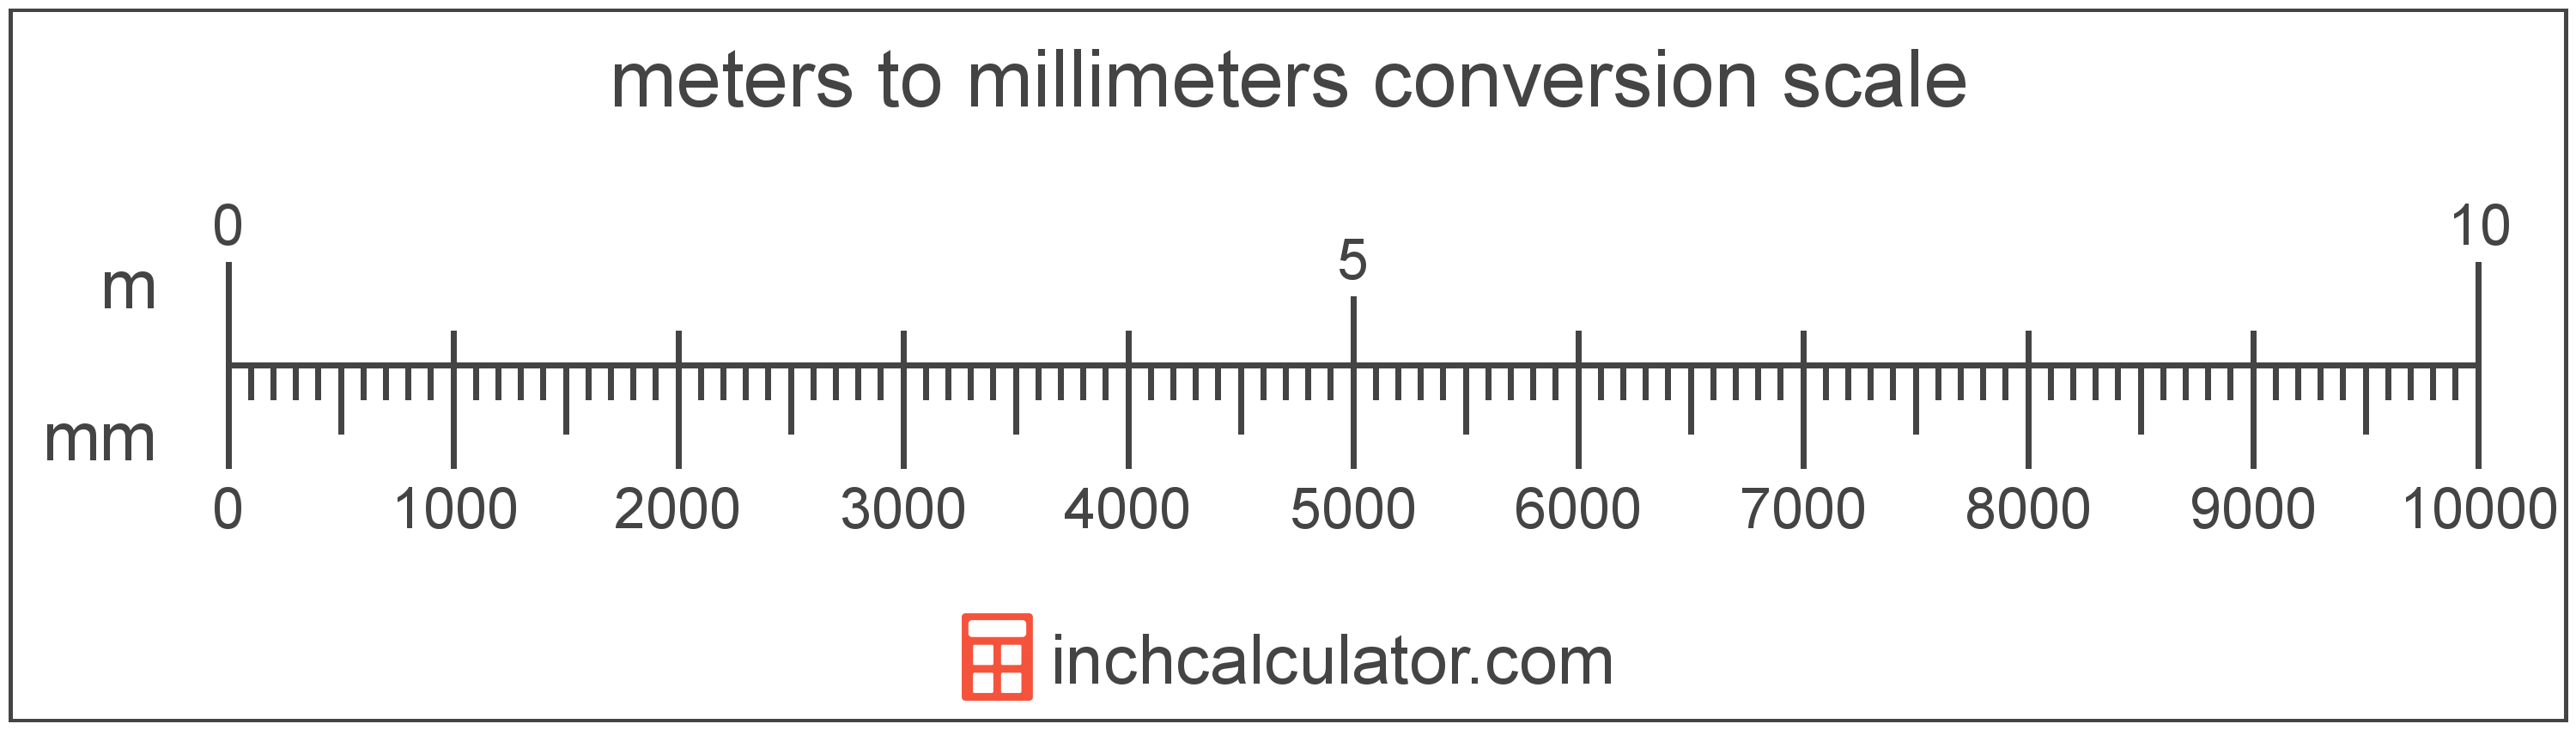 conversion scale showing millimeters and equivalent meters length values